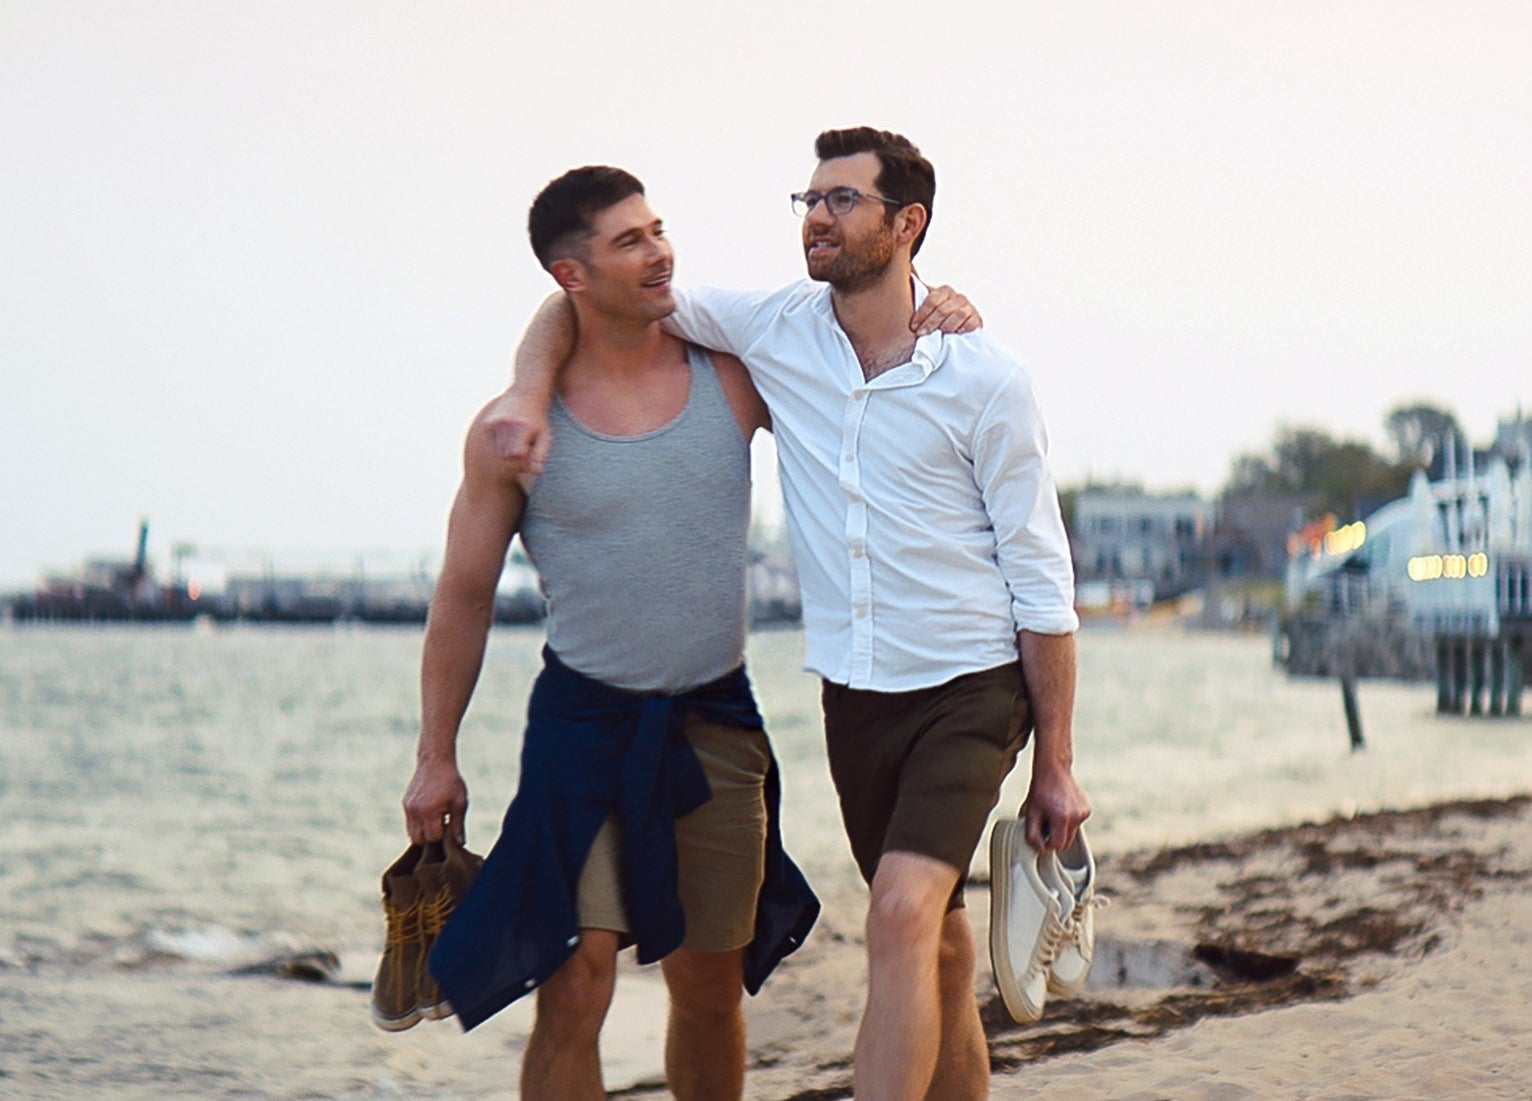 A screenshot from the movie of a couple walking on a beach together